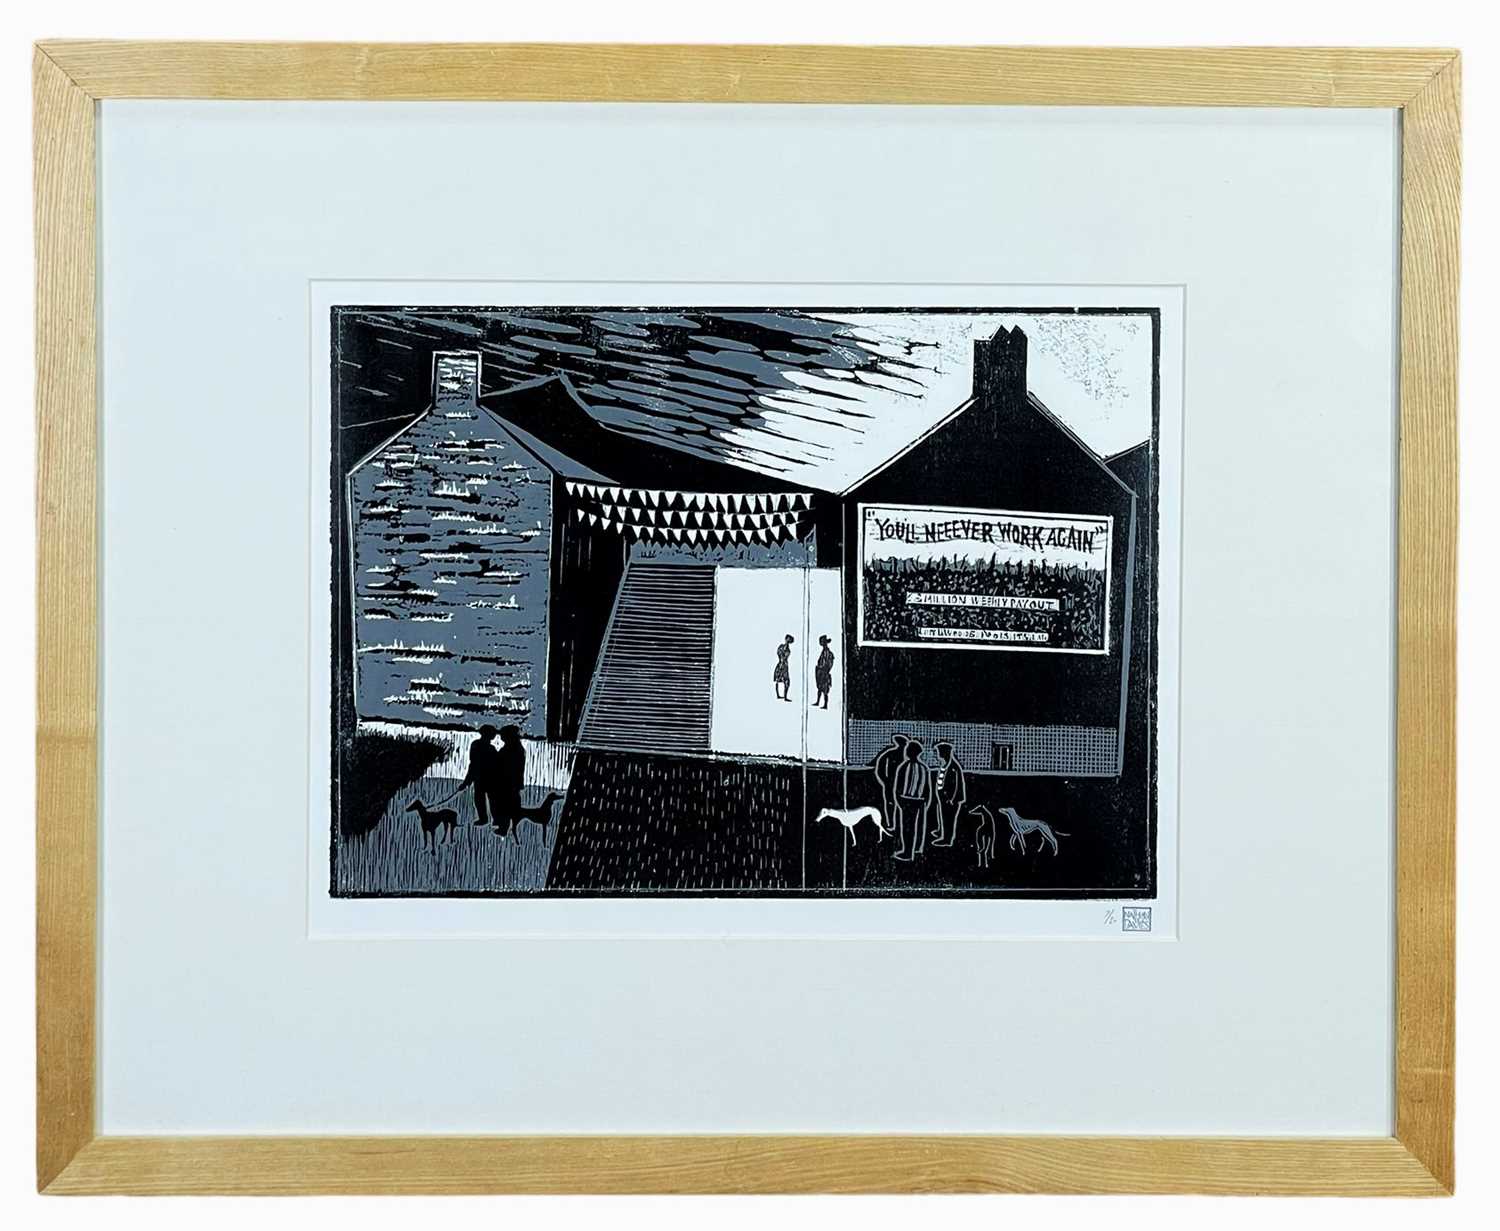 THOMAS NATHANIEL DAVIES limited edition (7/20) linocut - south Wales valley street with figures - Image 2 of 2